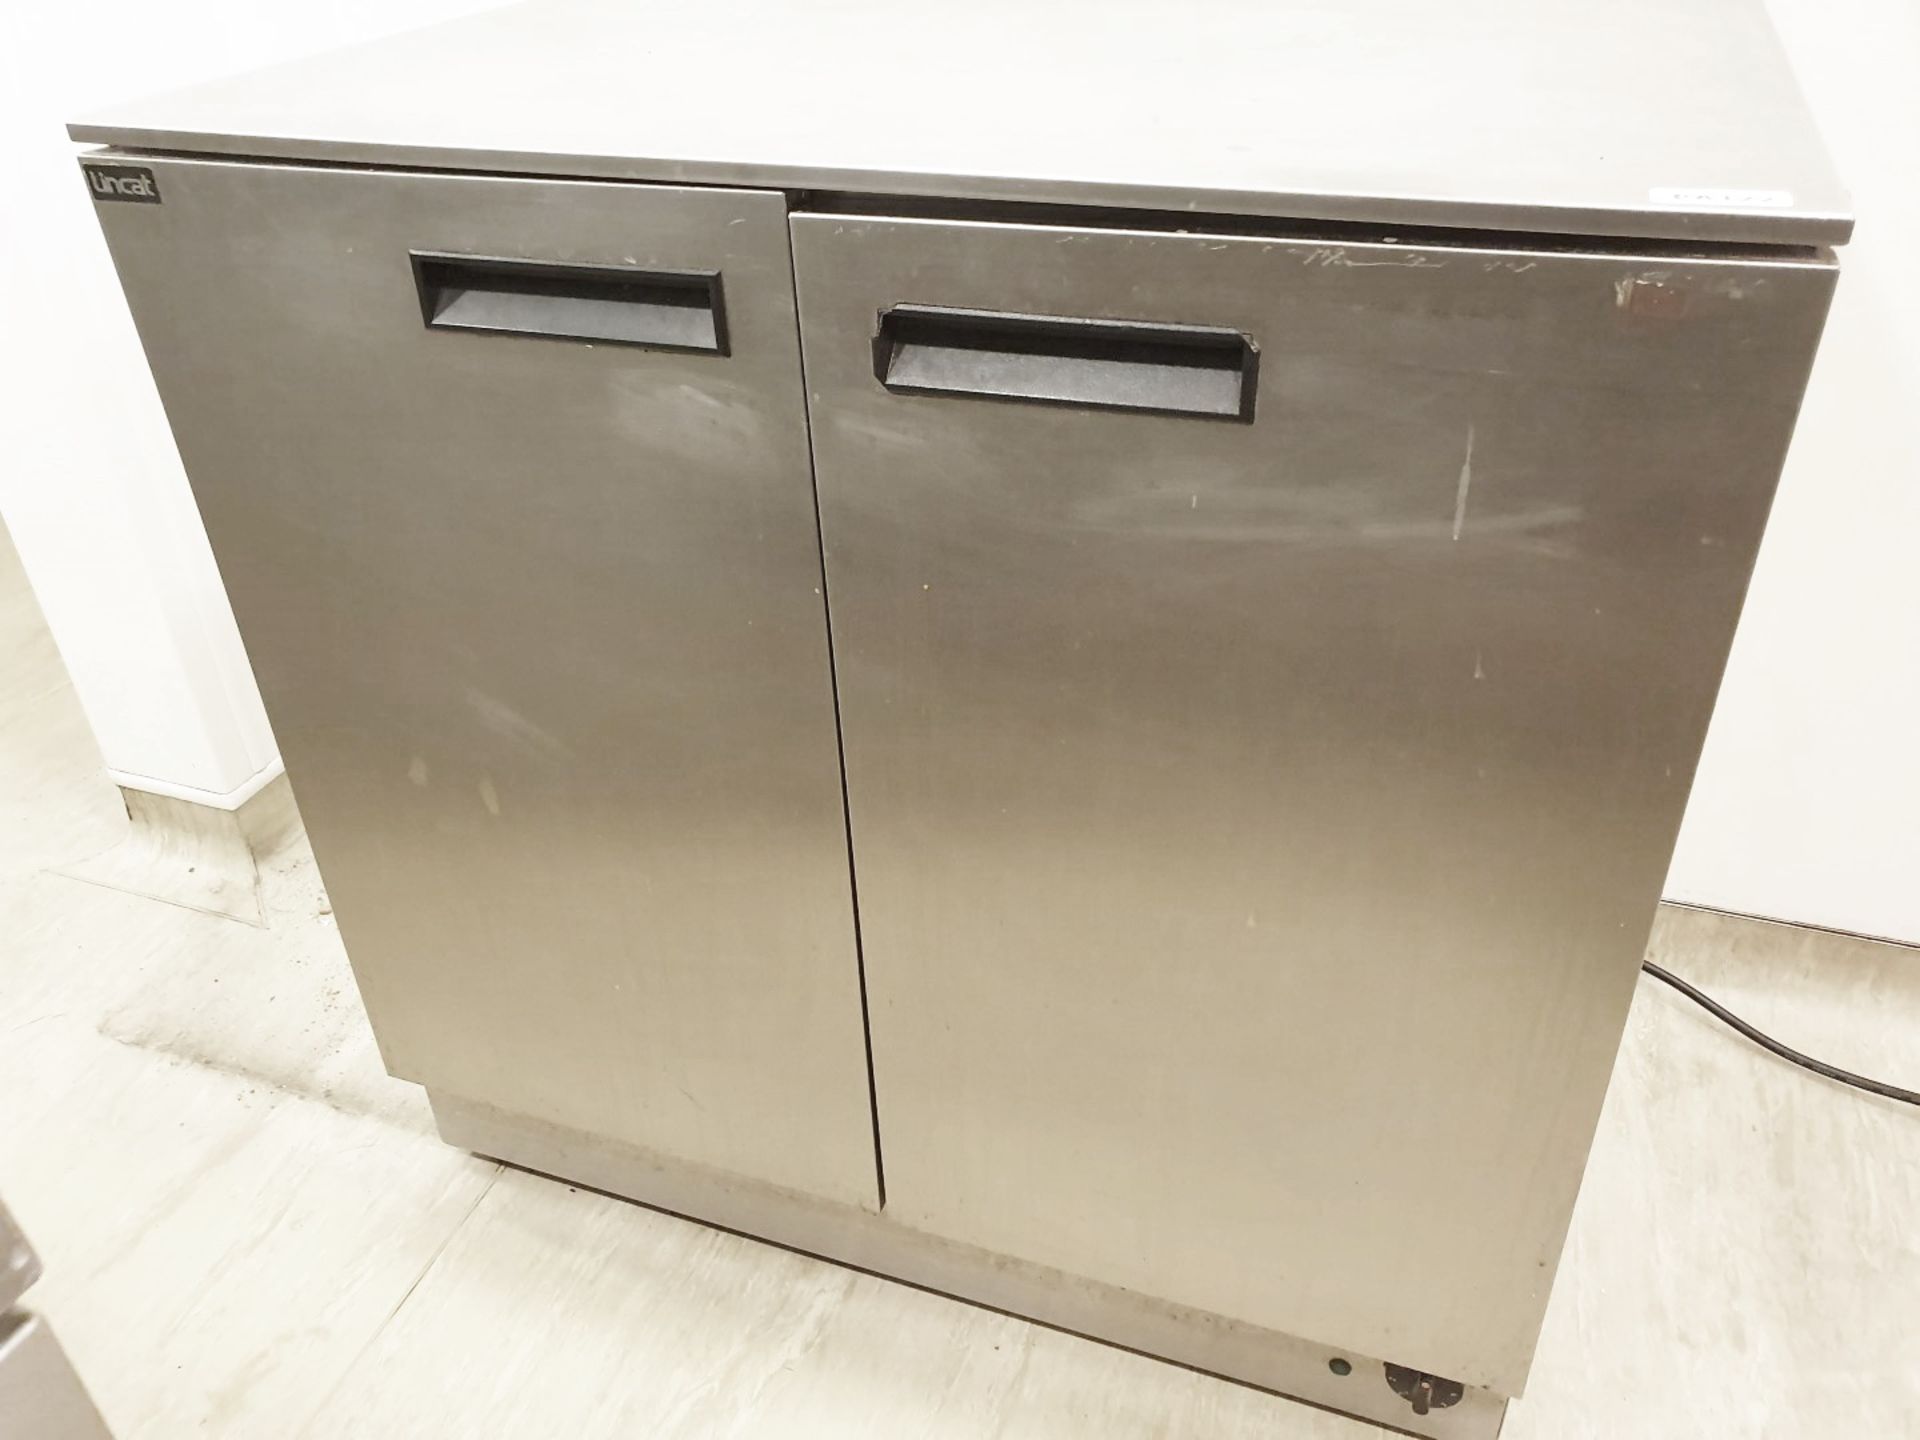 1 x Lincat Plate Warming Cupboard With Stainless Steel Exterior - H90 x W90 x D60 cms - Ref - Image 2 of 4